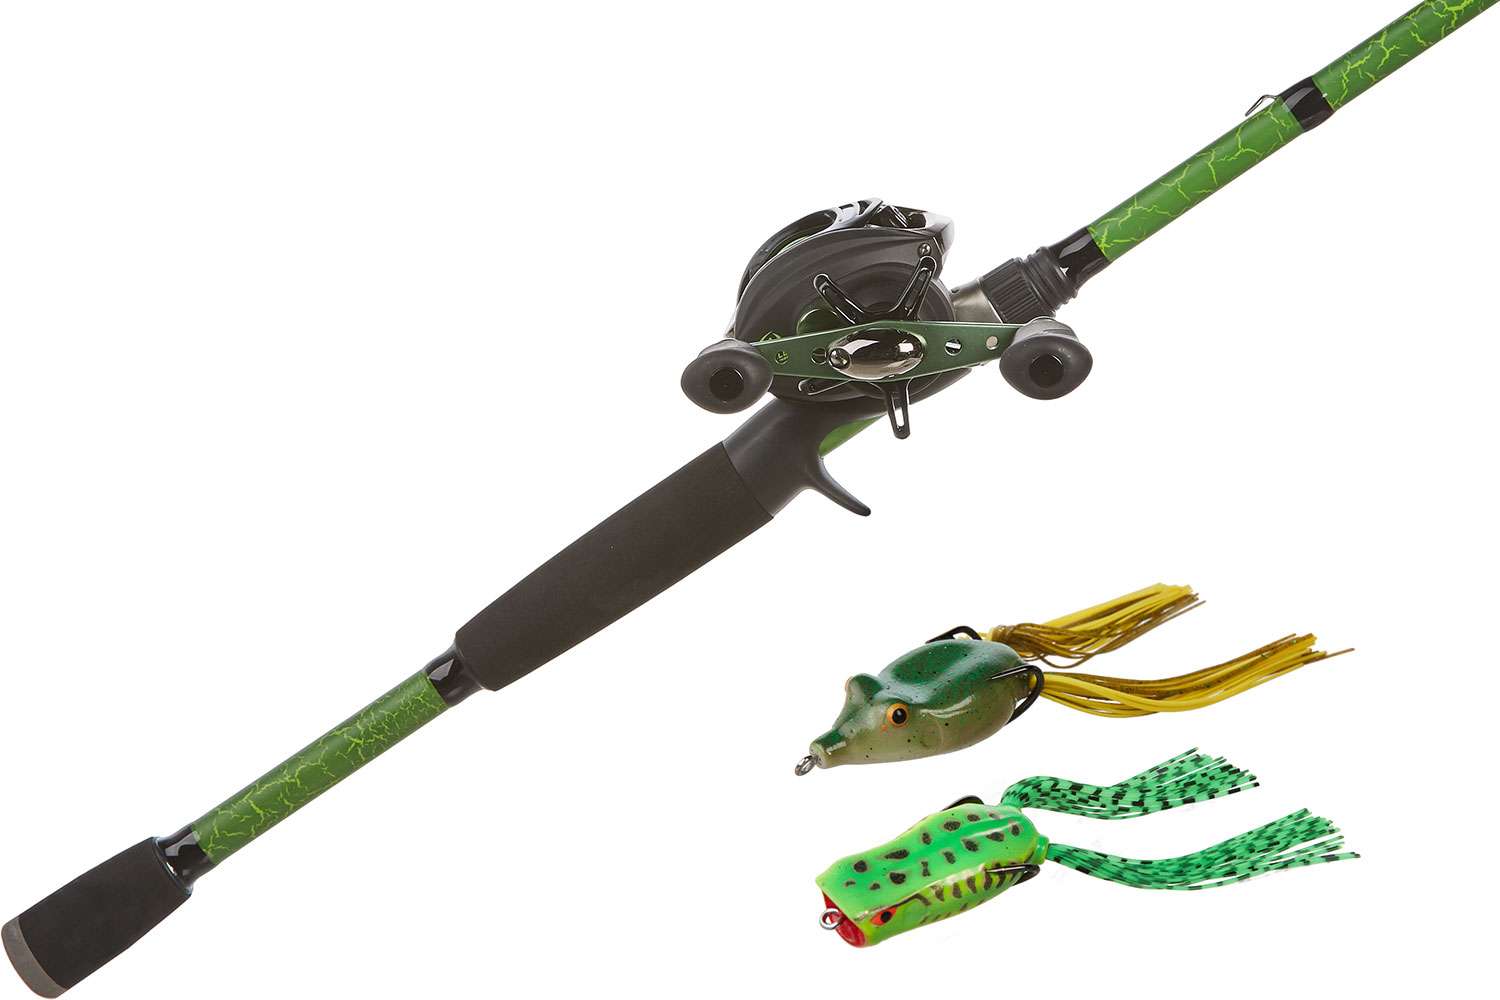 7 Ft Fishing Rod With Reel Combo Kit With Frog Fish